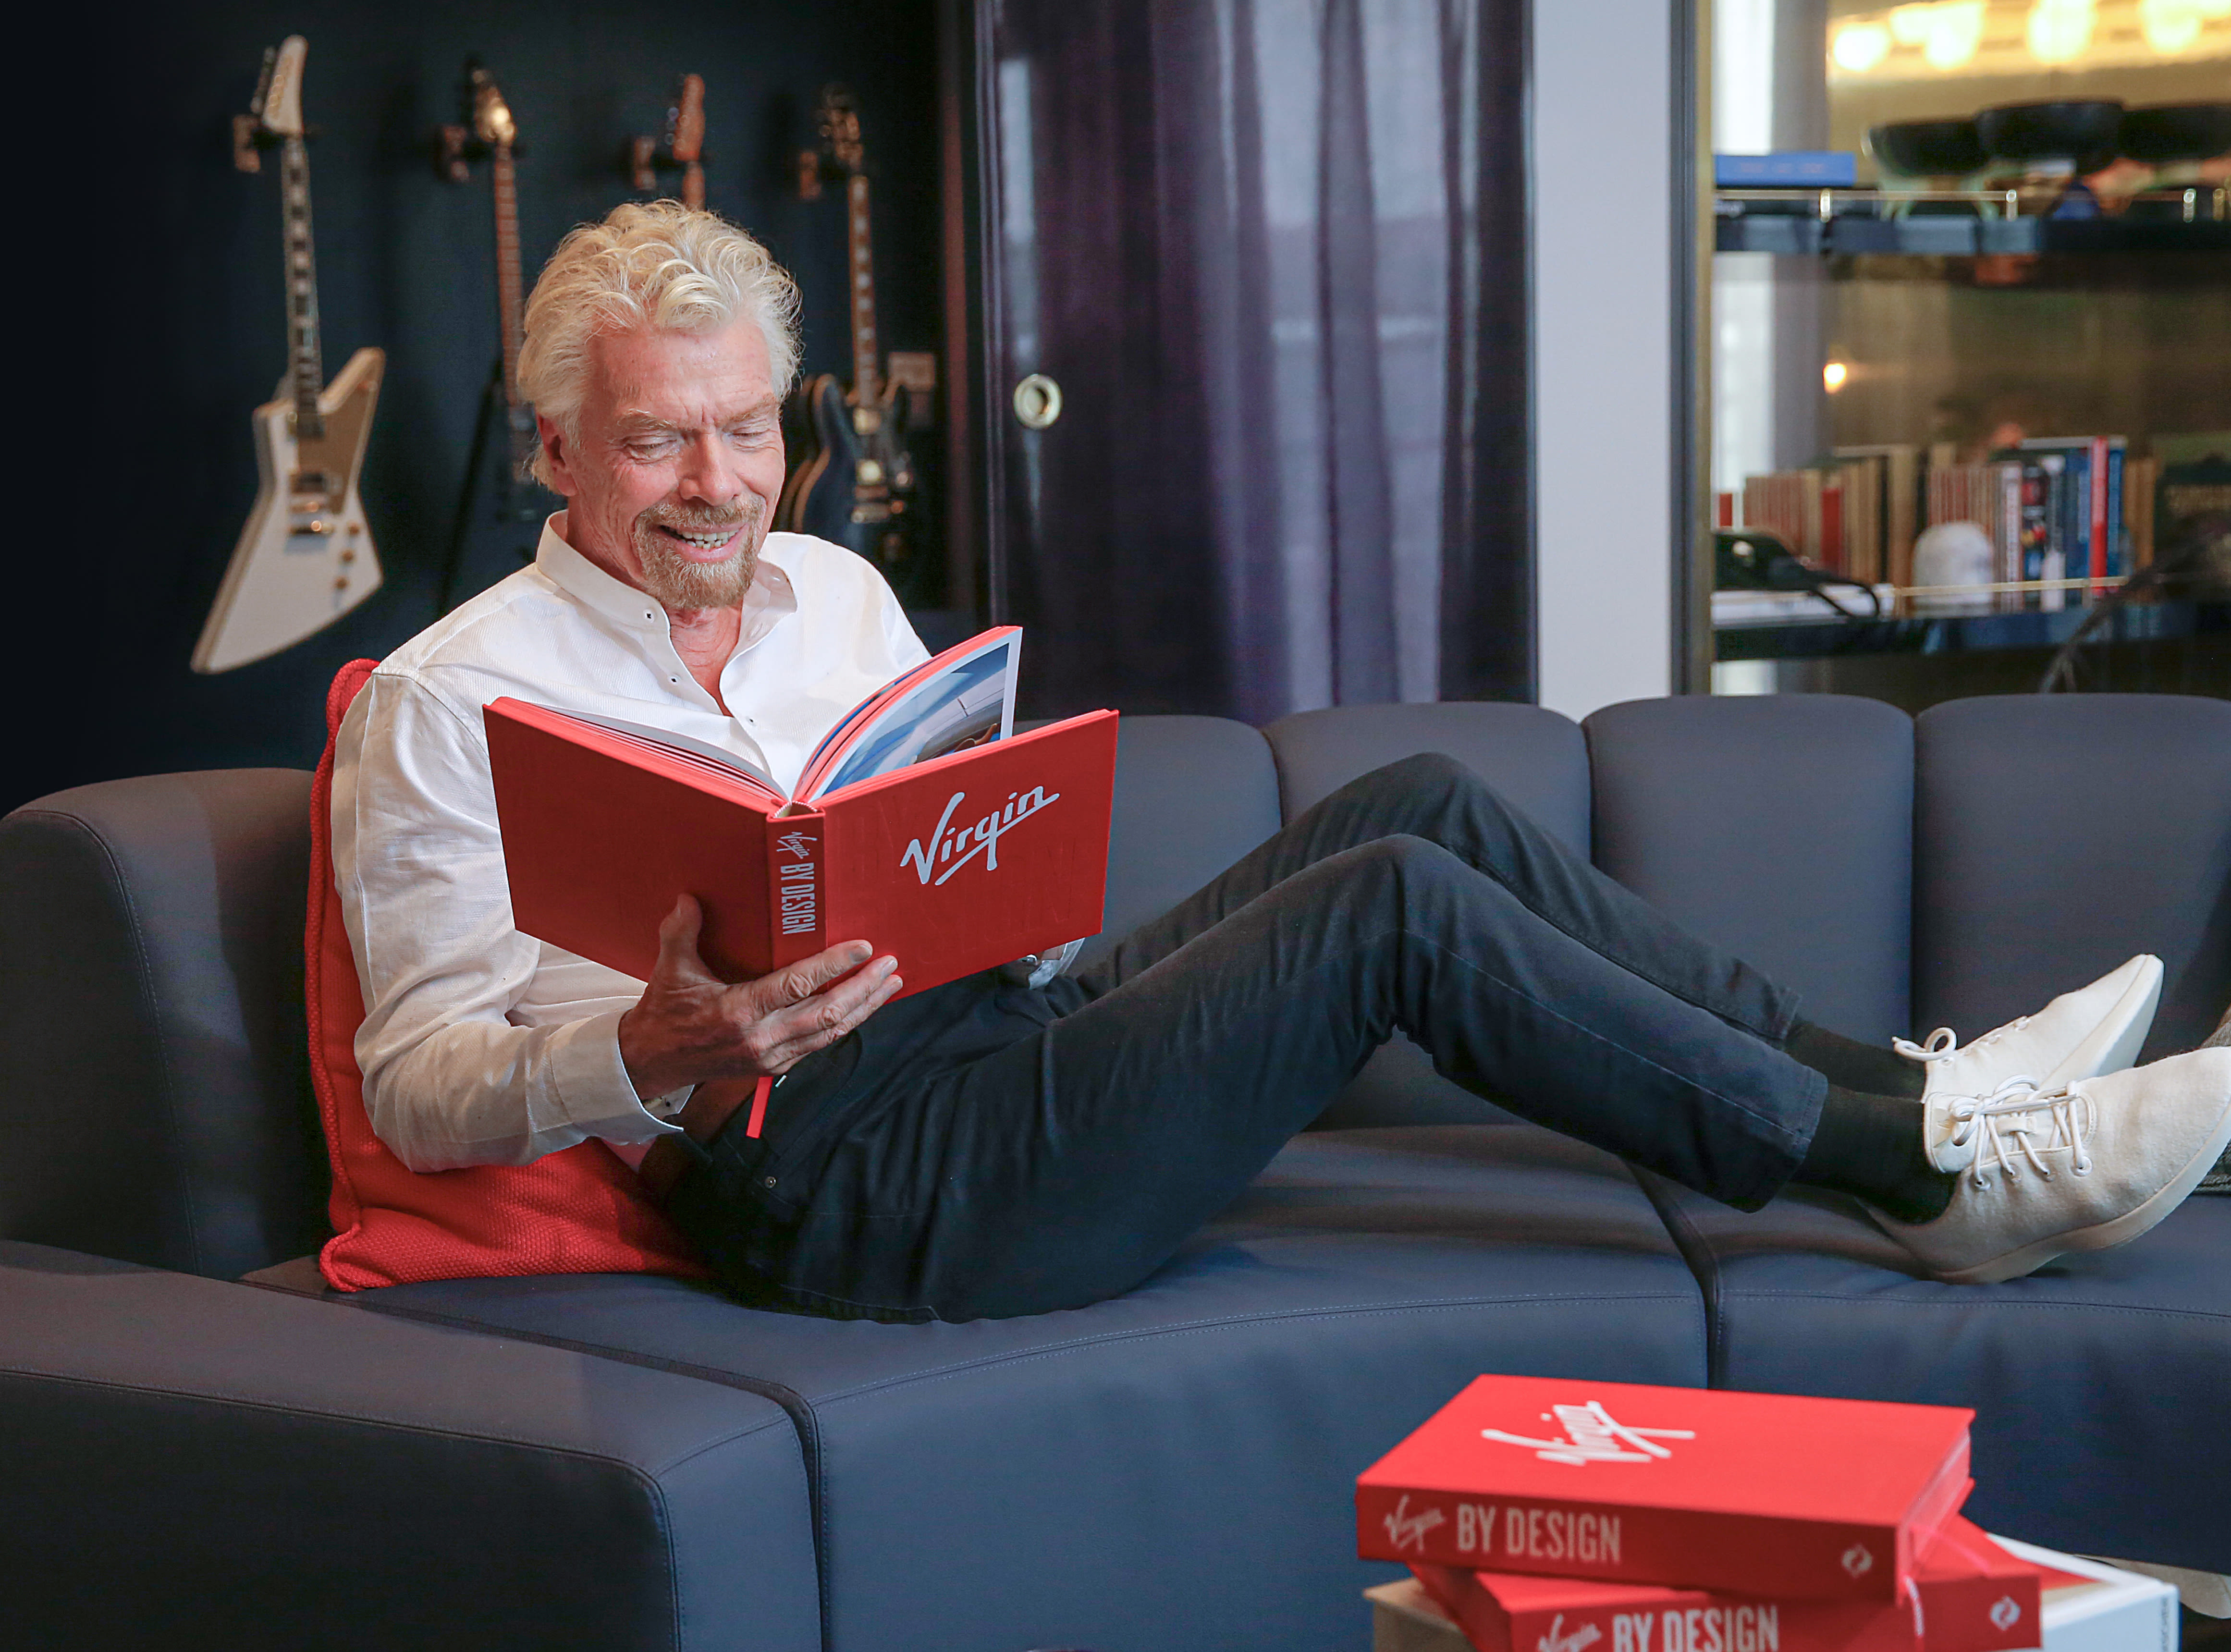 Richard Branson relaxing on a sofa reading a copy of Virgin By Design